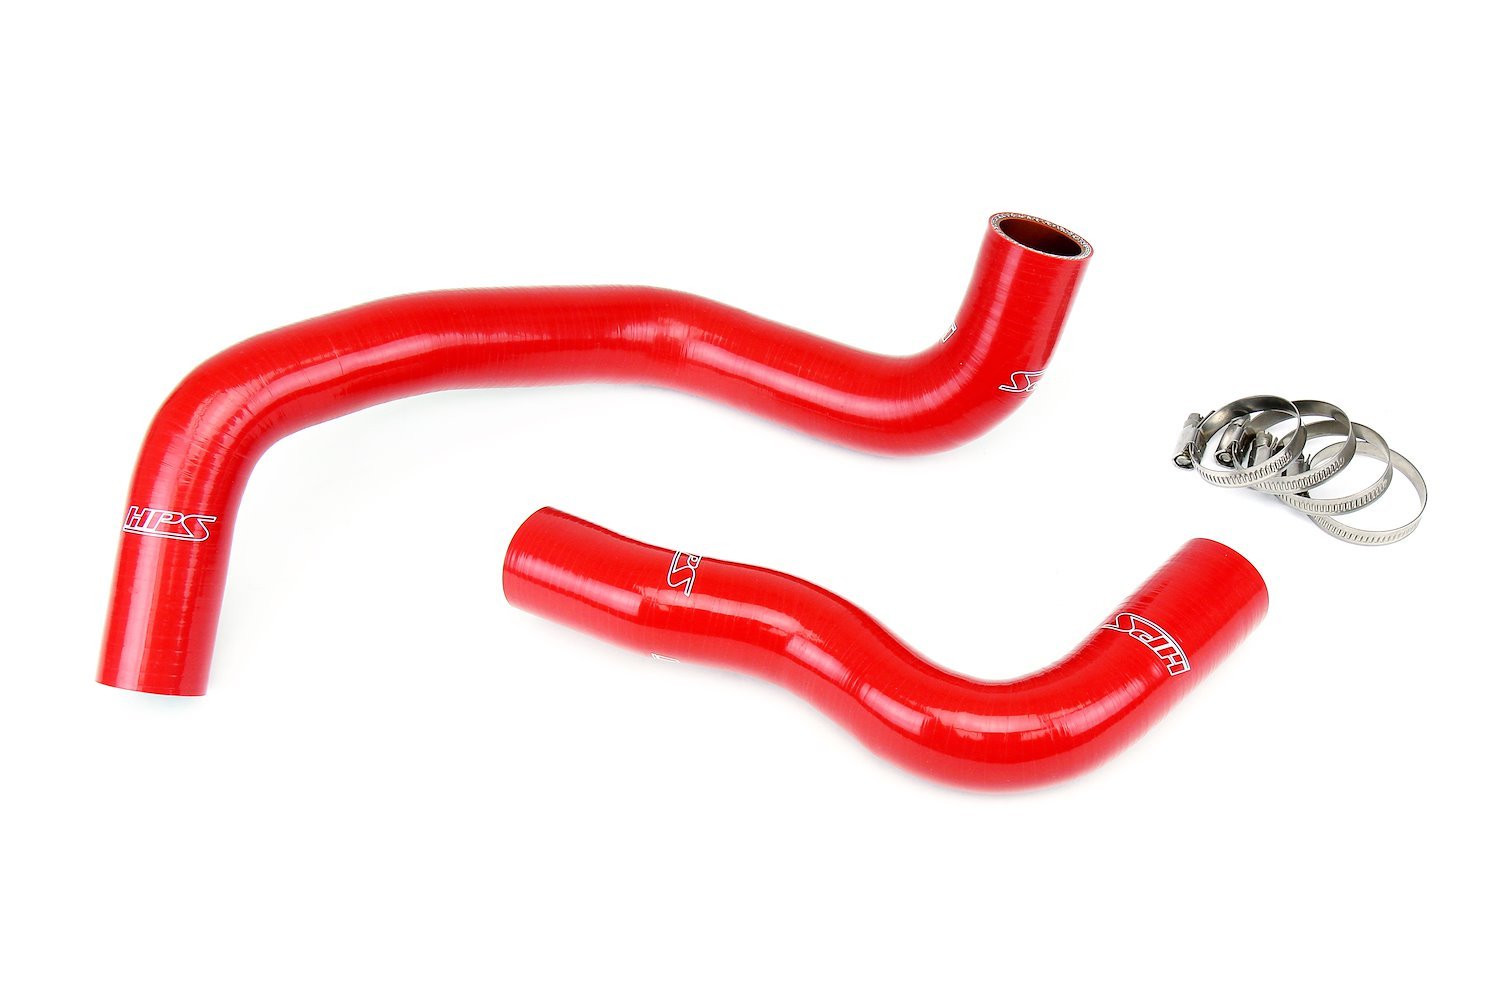 57-1833-RED Radiator Hose Kit, 3-Ply Reinforced Silicone, Replaces Rubber Radiator Coolant Hoses